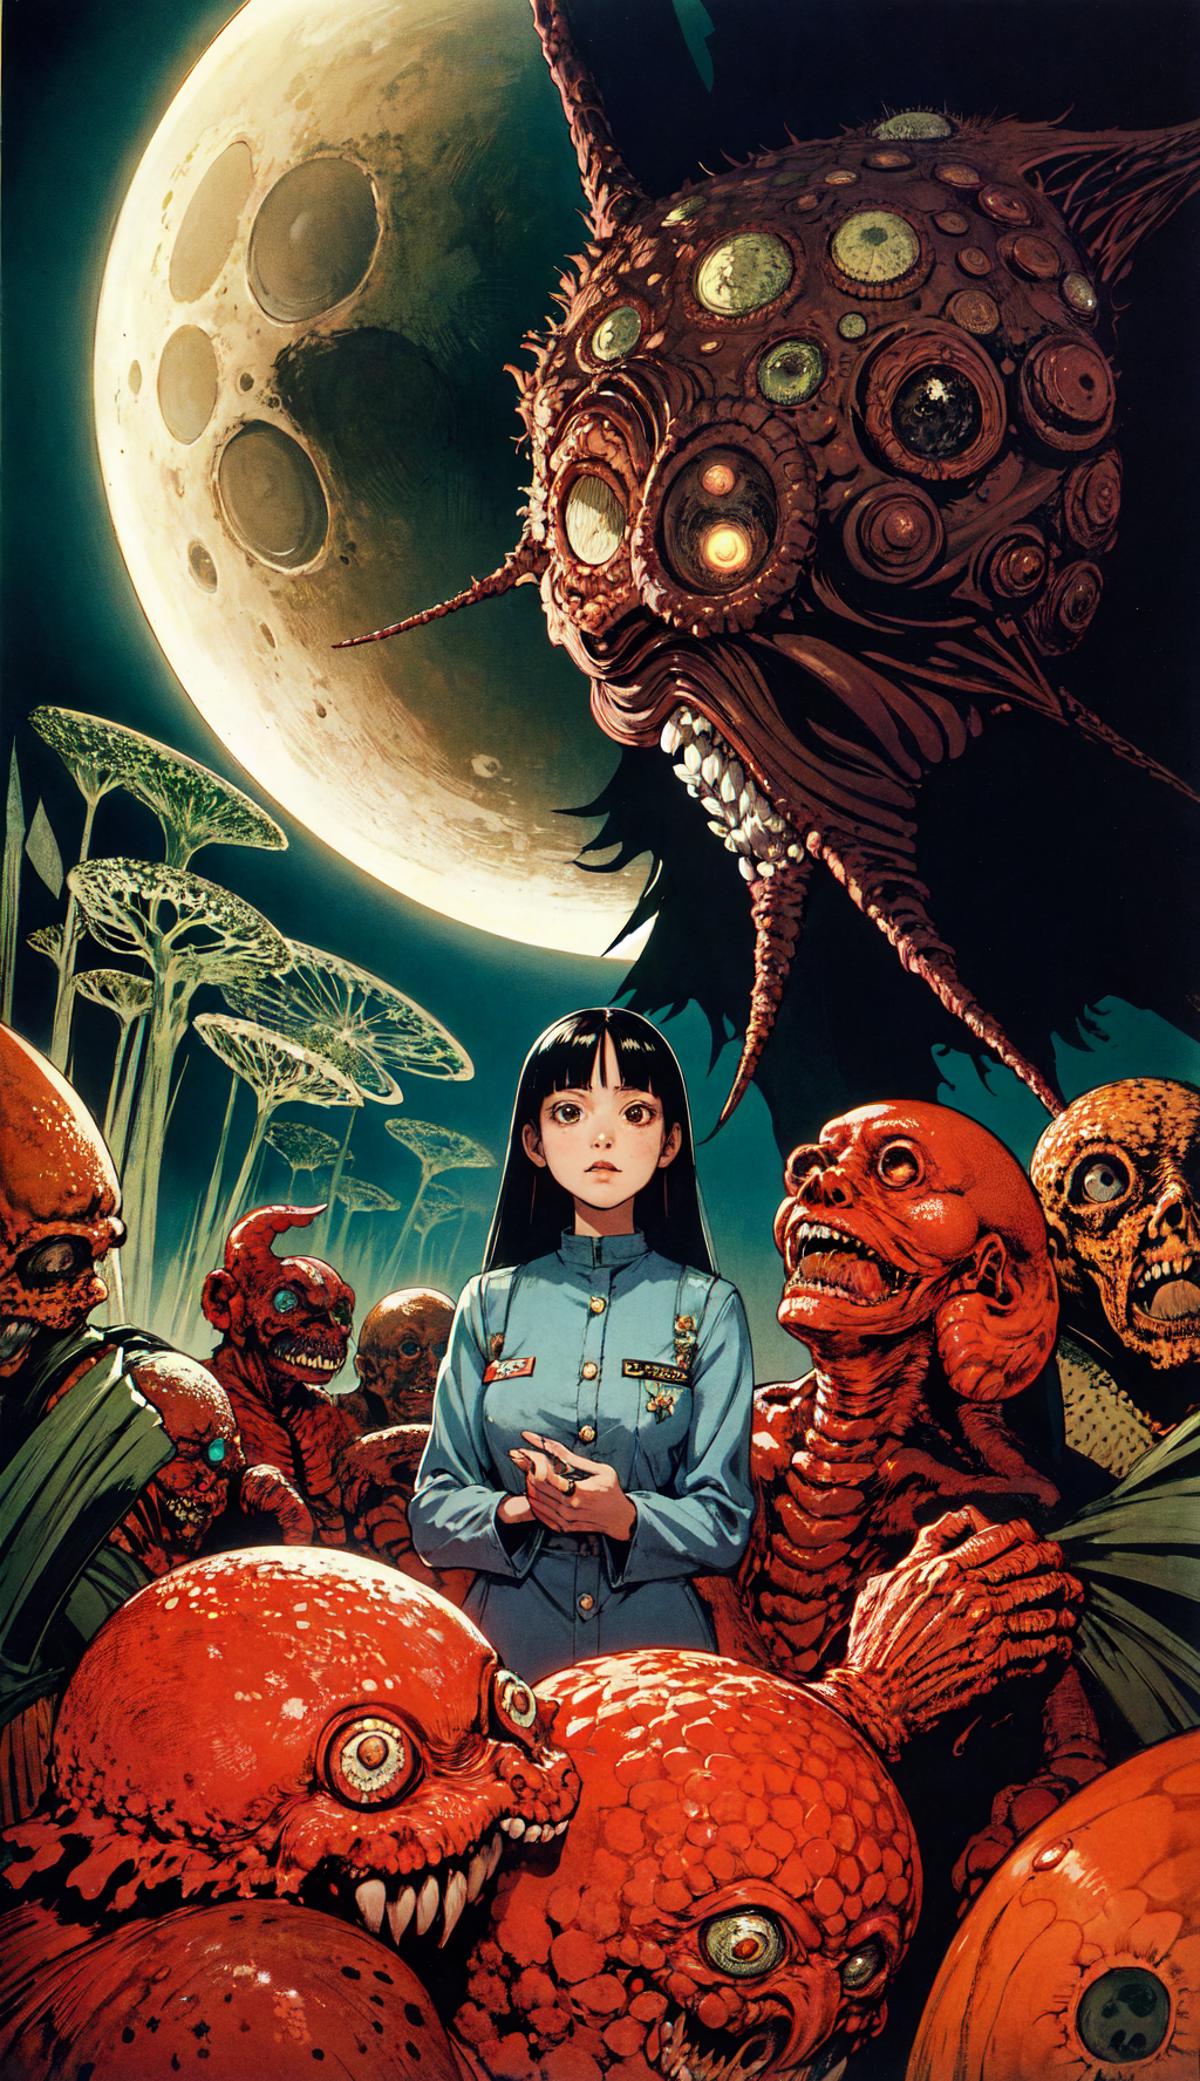 A young woman surrounded by various monsters, including a giant red spider, in an anime-style artwork.